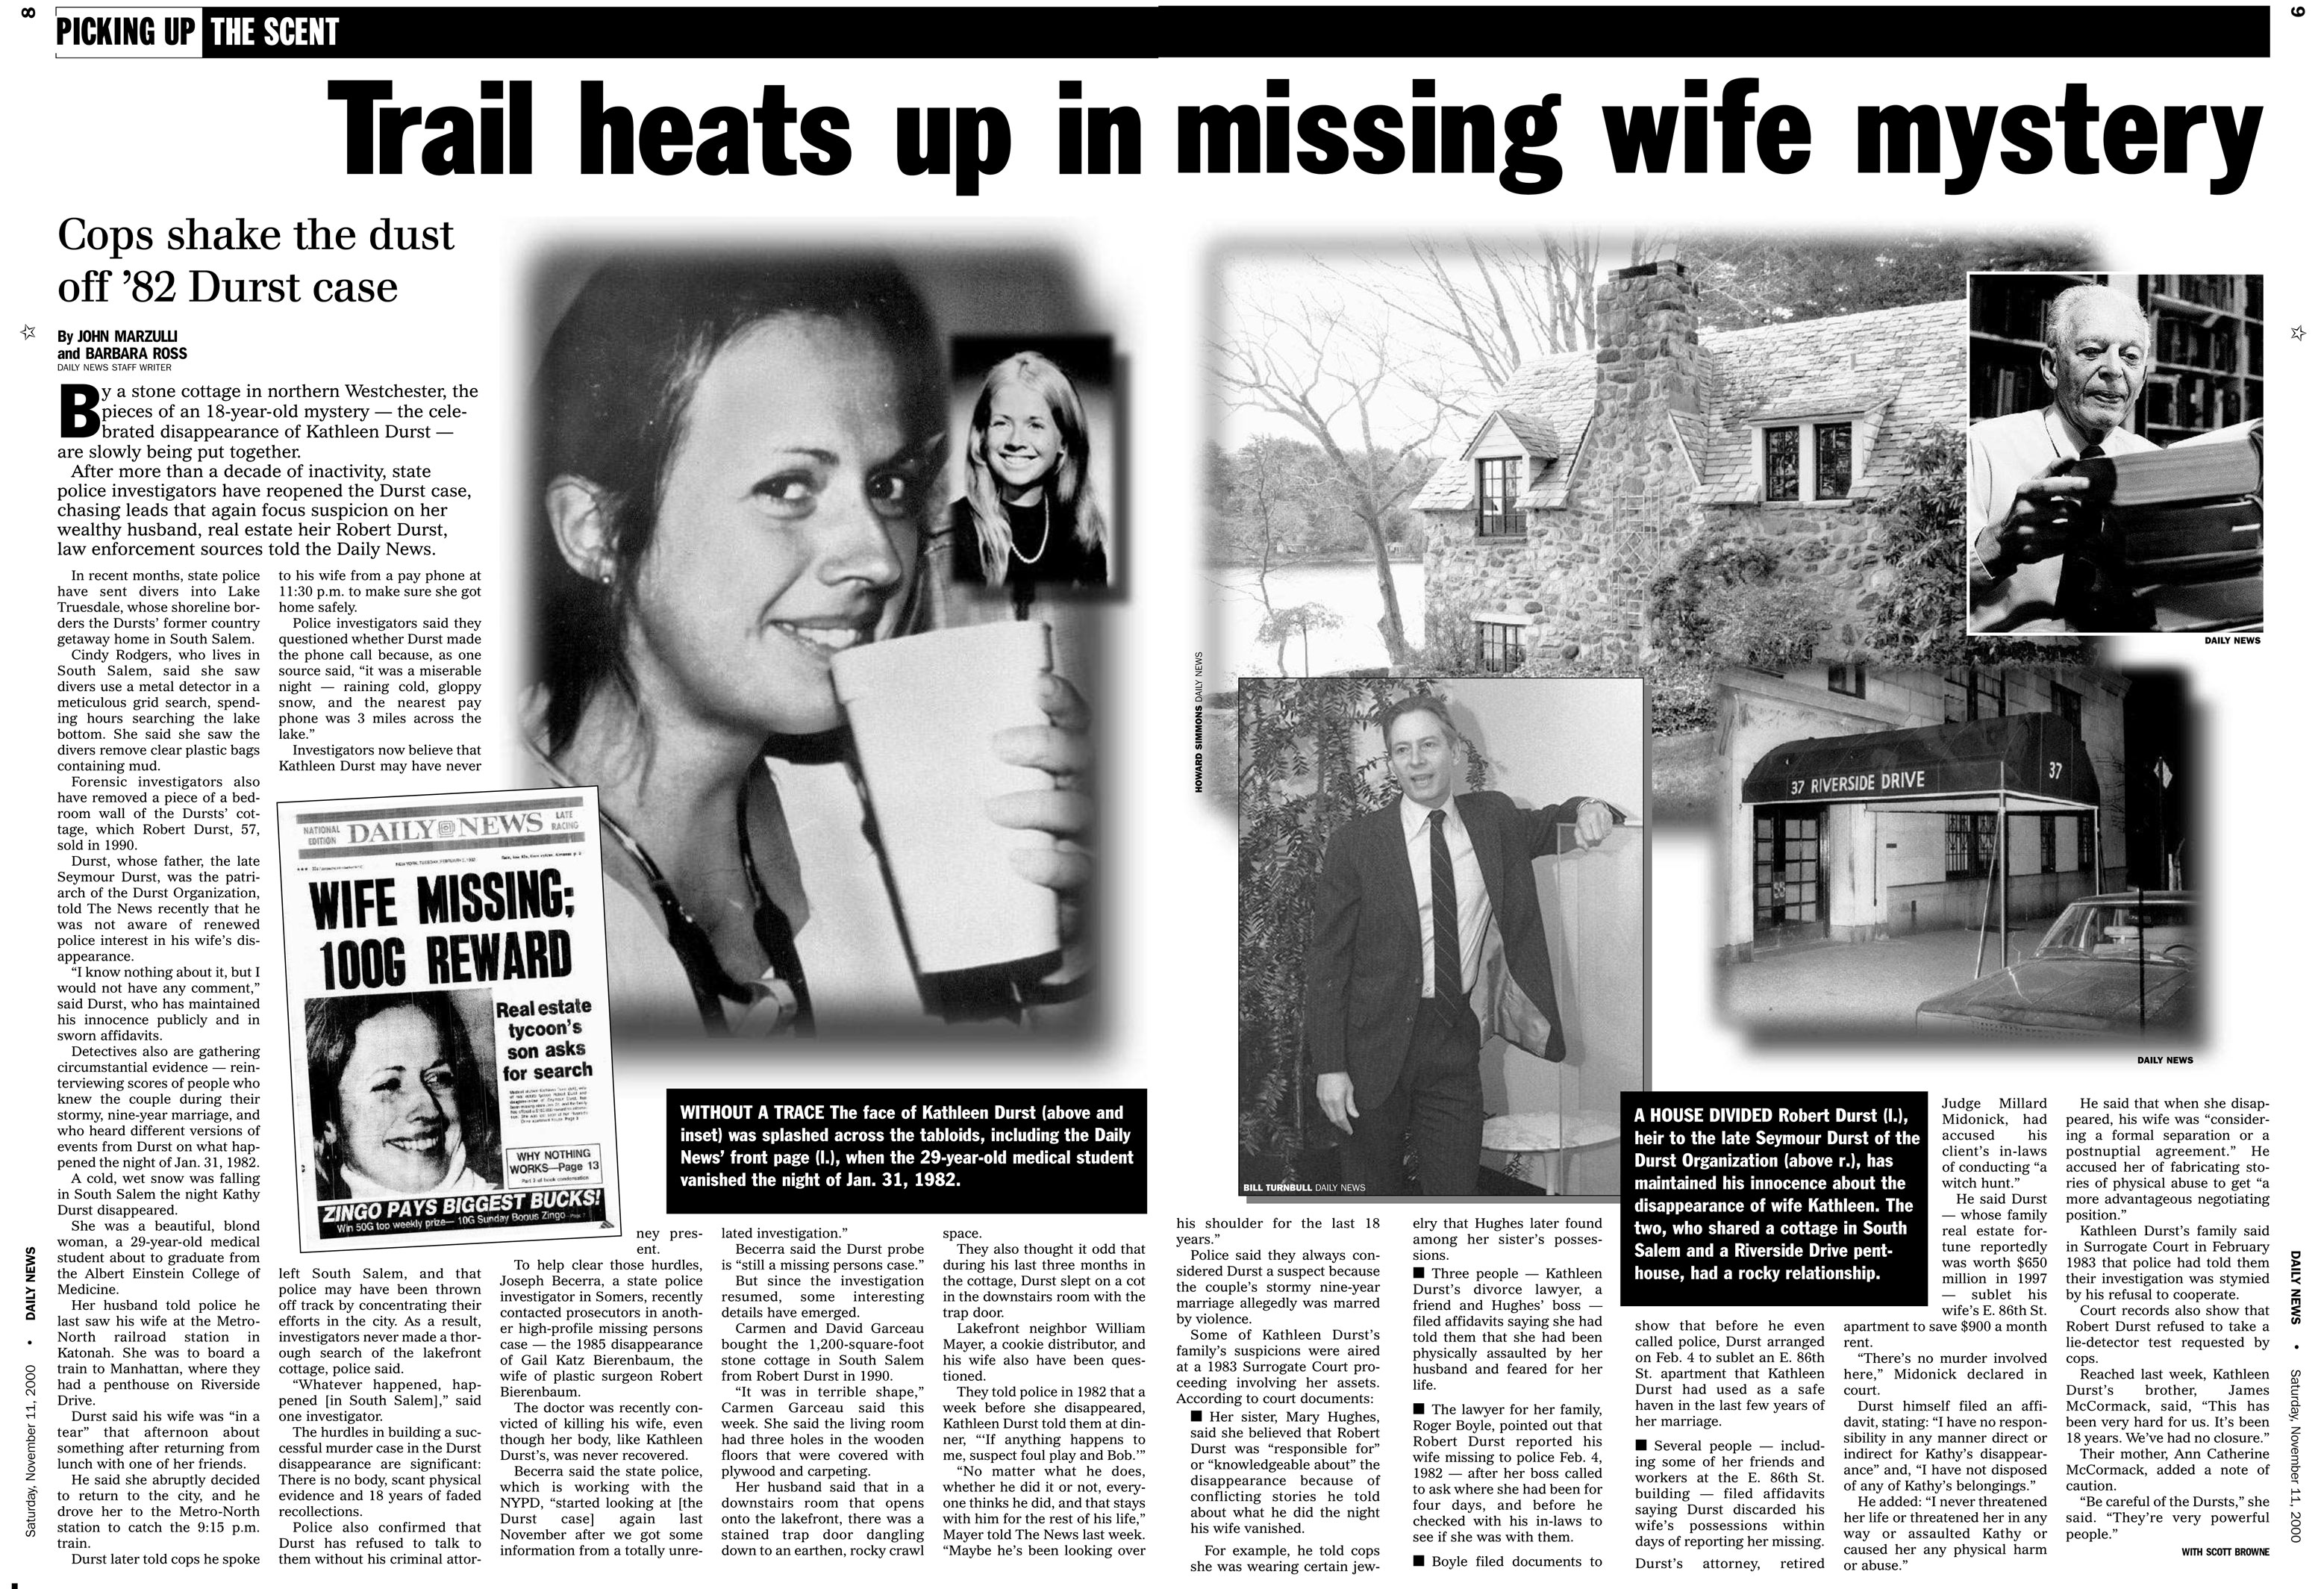 A spread in the New York Daily News from November 2000 details the disappearance of Kathleen Durst in 1982.